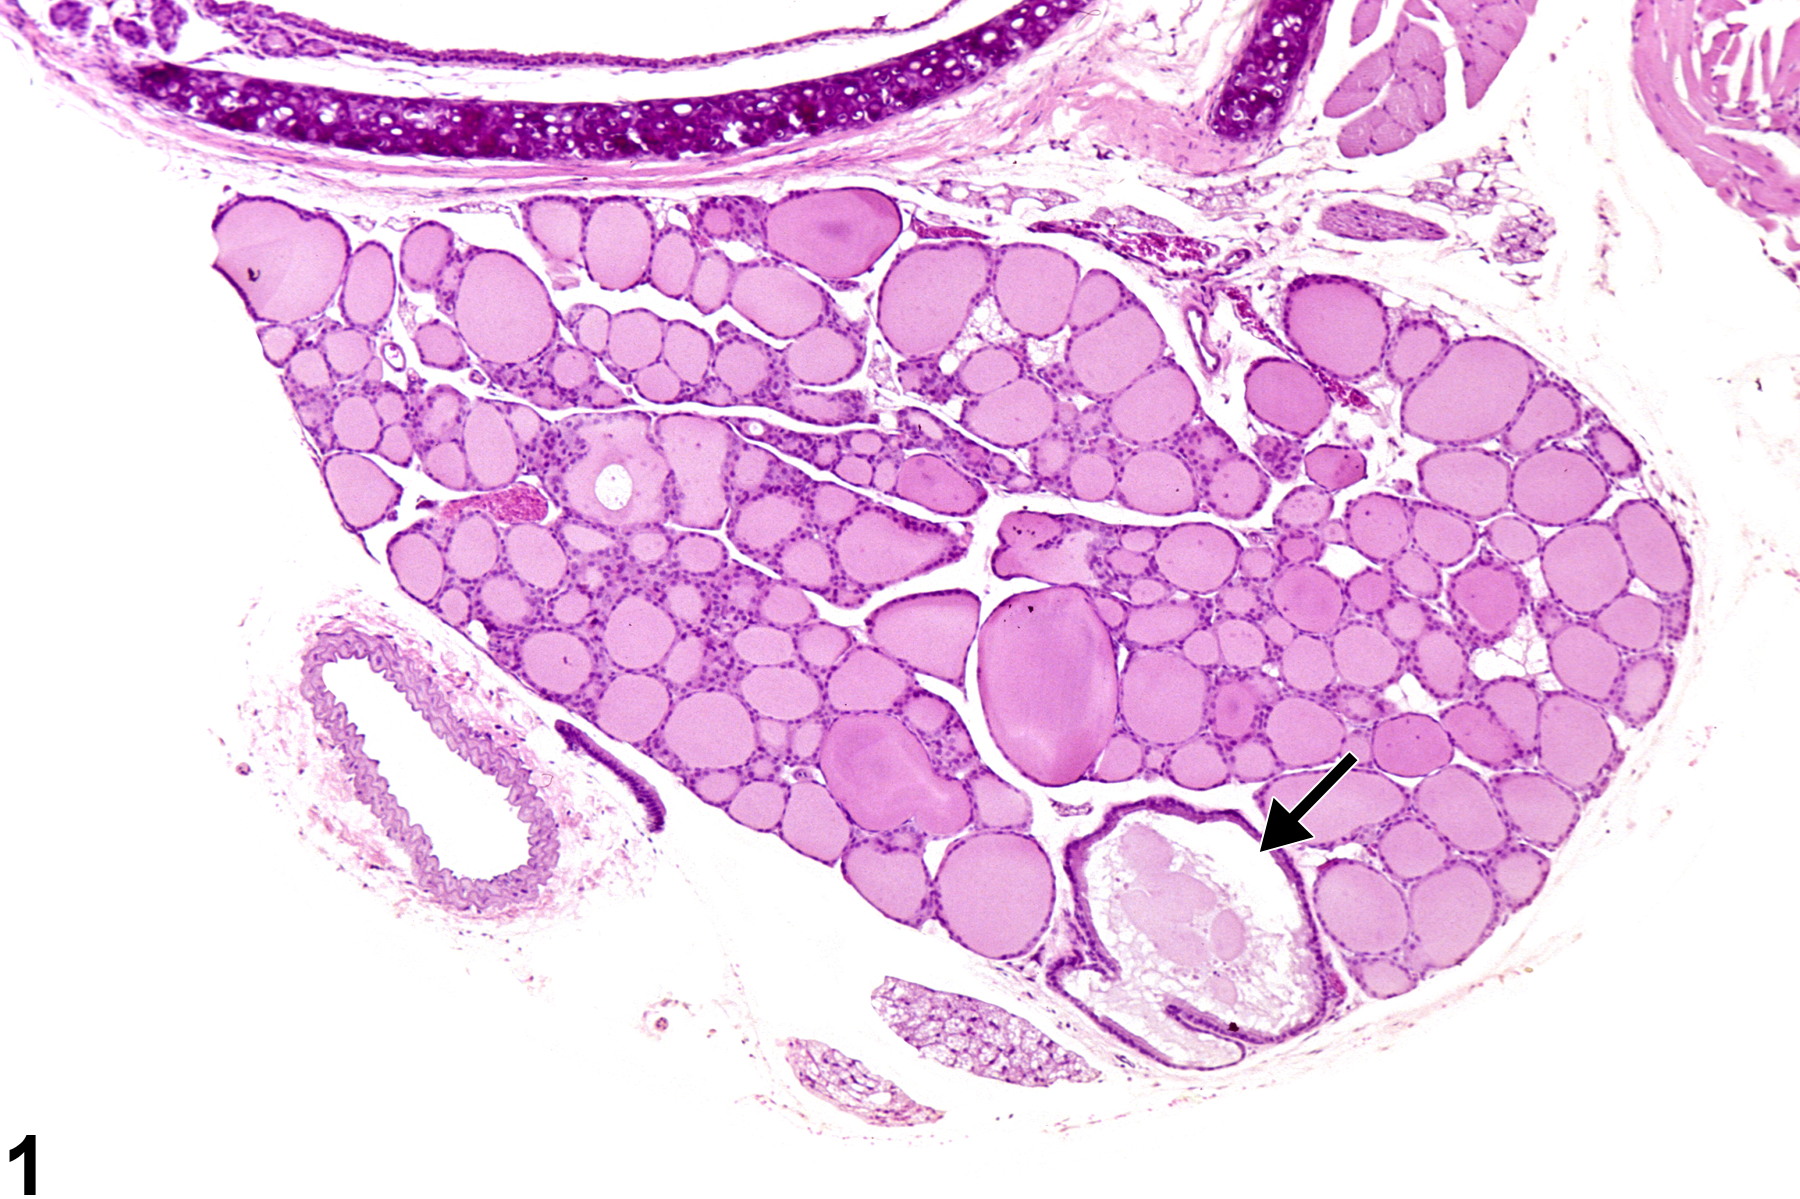 Image of cyst, congenital in the thyroid gland from a female F344/N rat in a chronic study